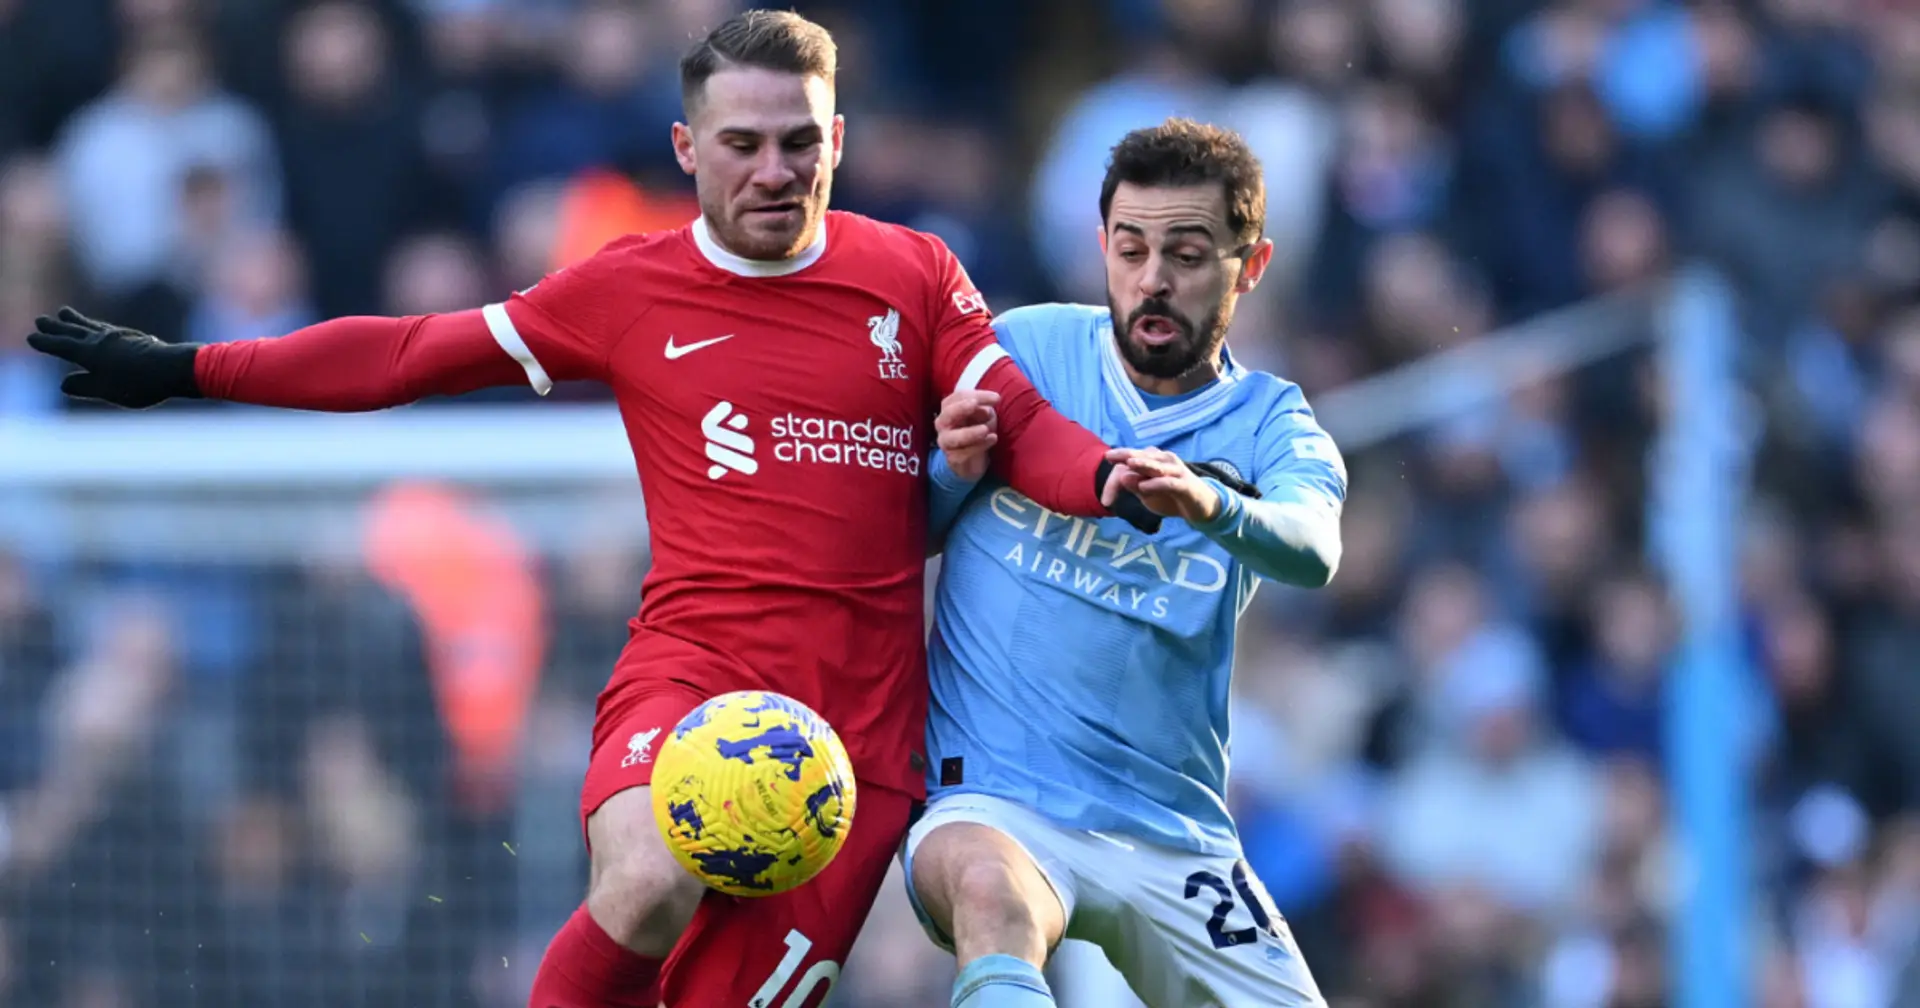 Man City on Sunday: a look at Liverpool's next 5 fixtures